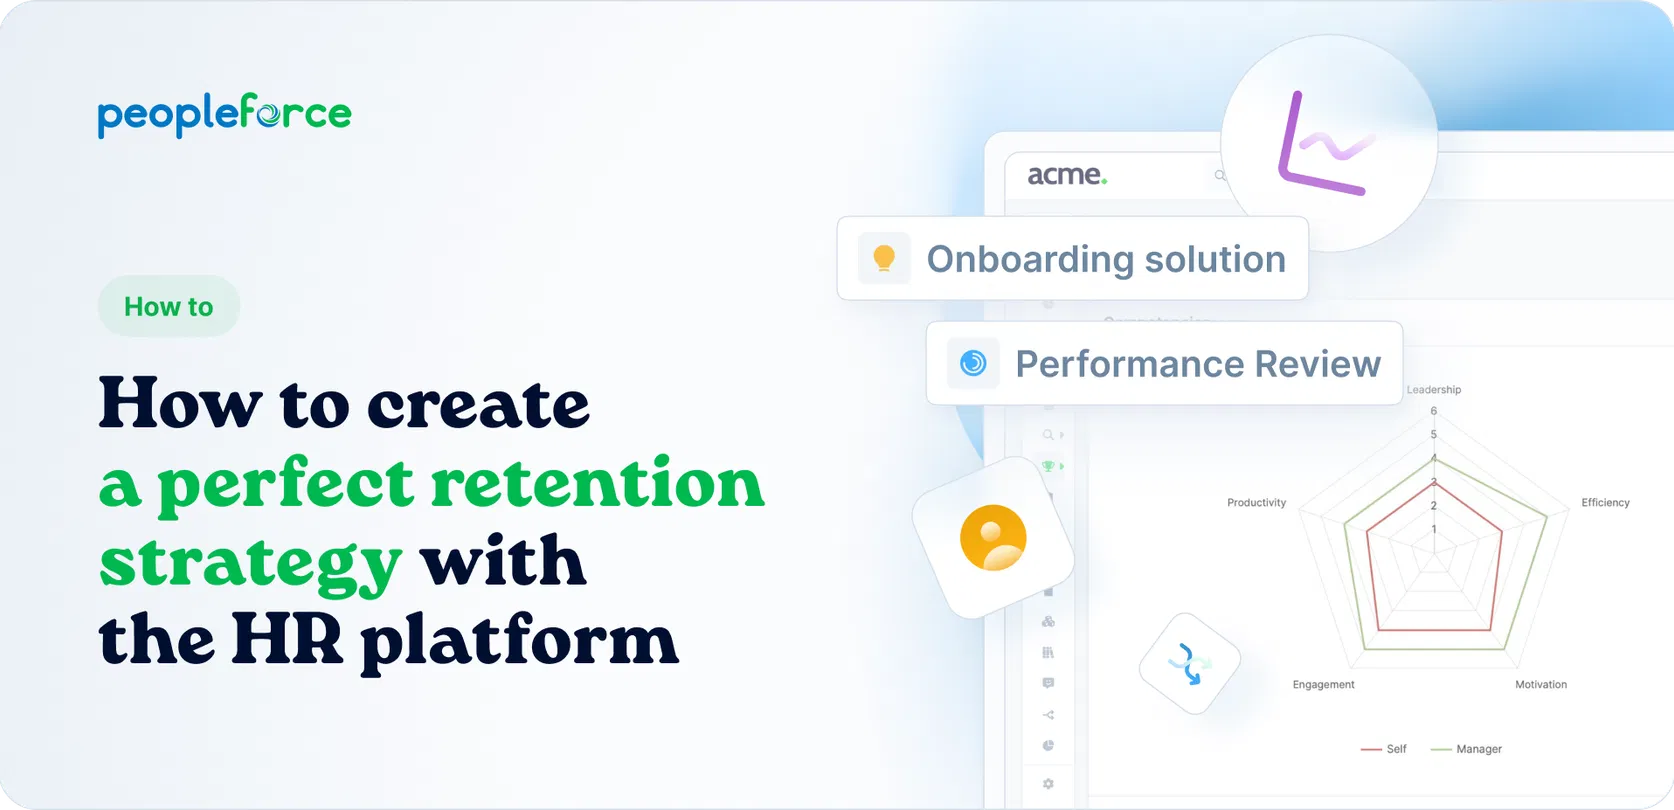 How to create a perfect retention strategy with the HR platform